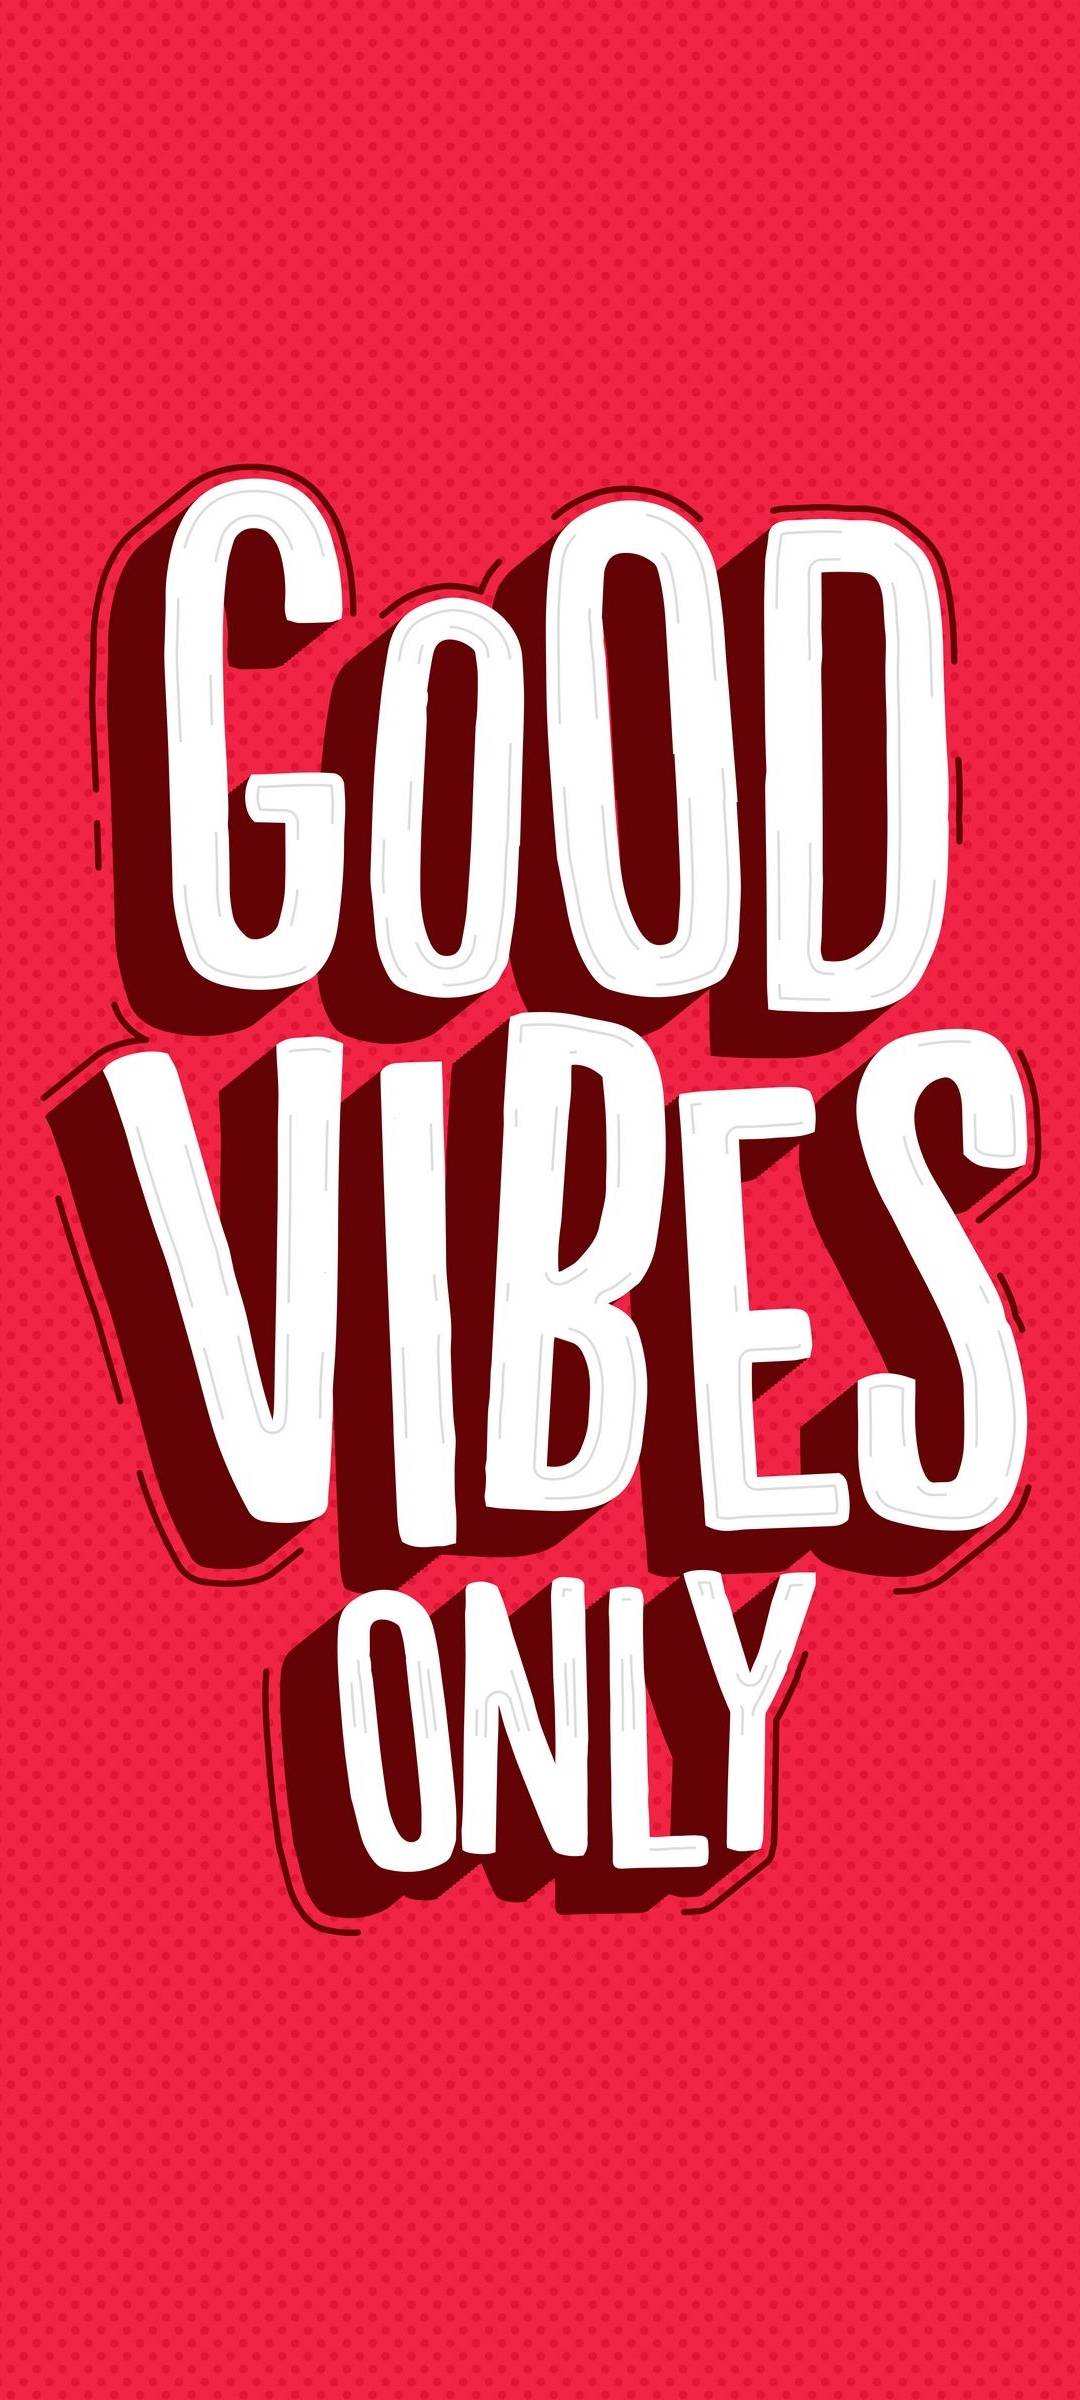 Good Vibes Wallpaper 72 images